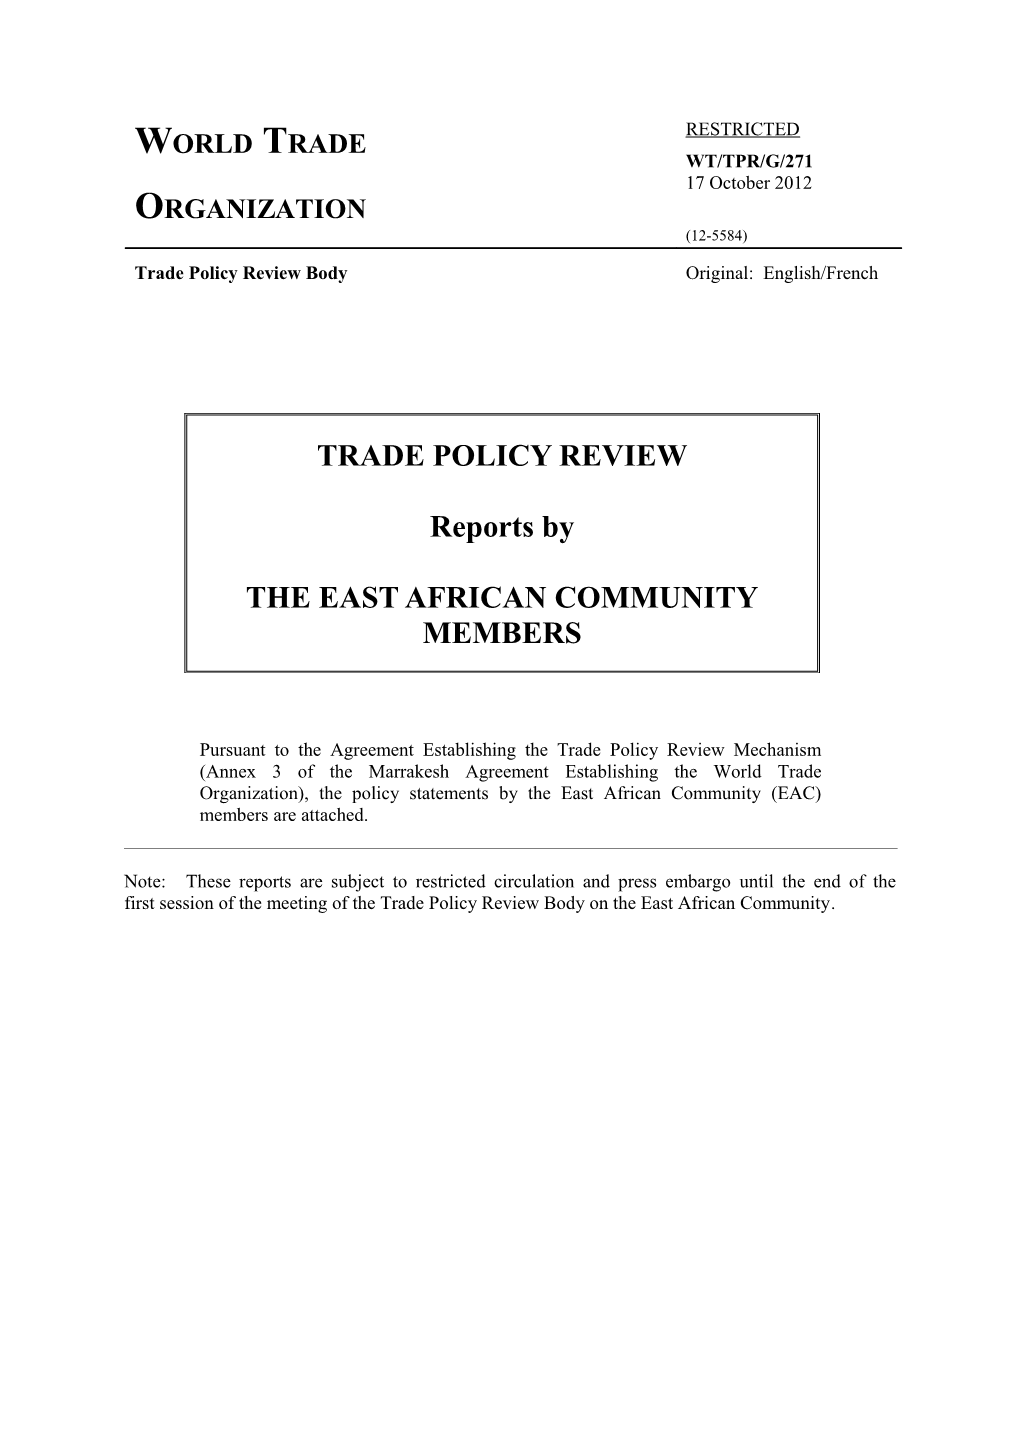 Trade Policy Review Body s4